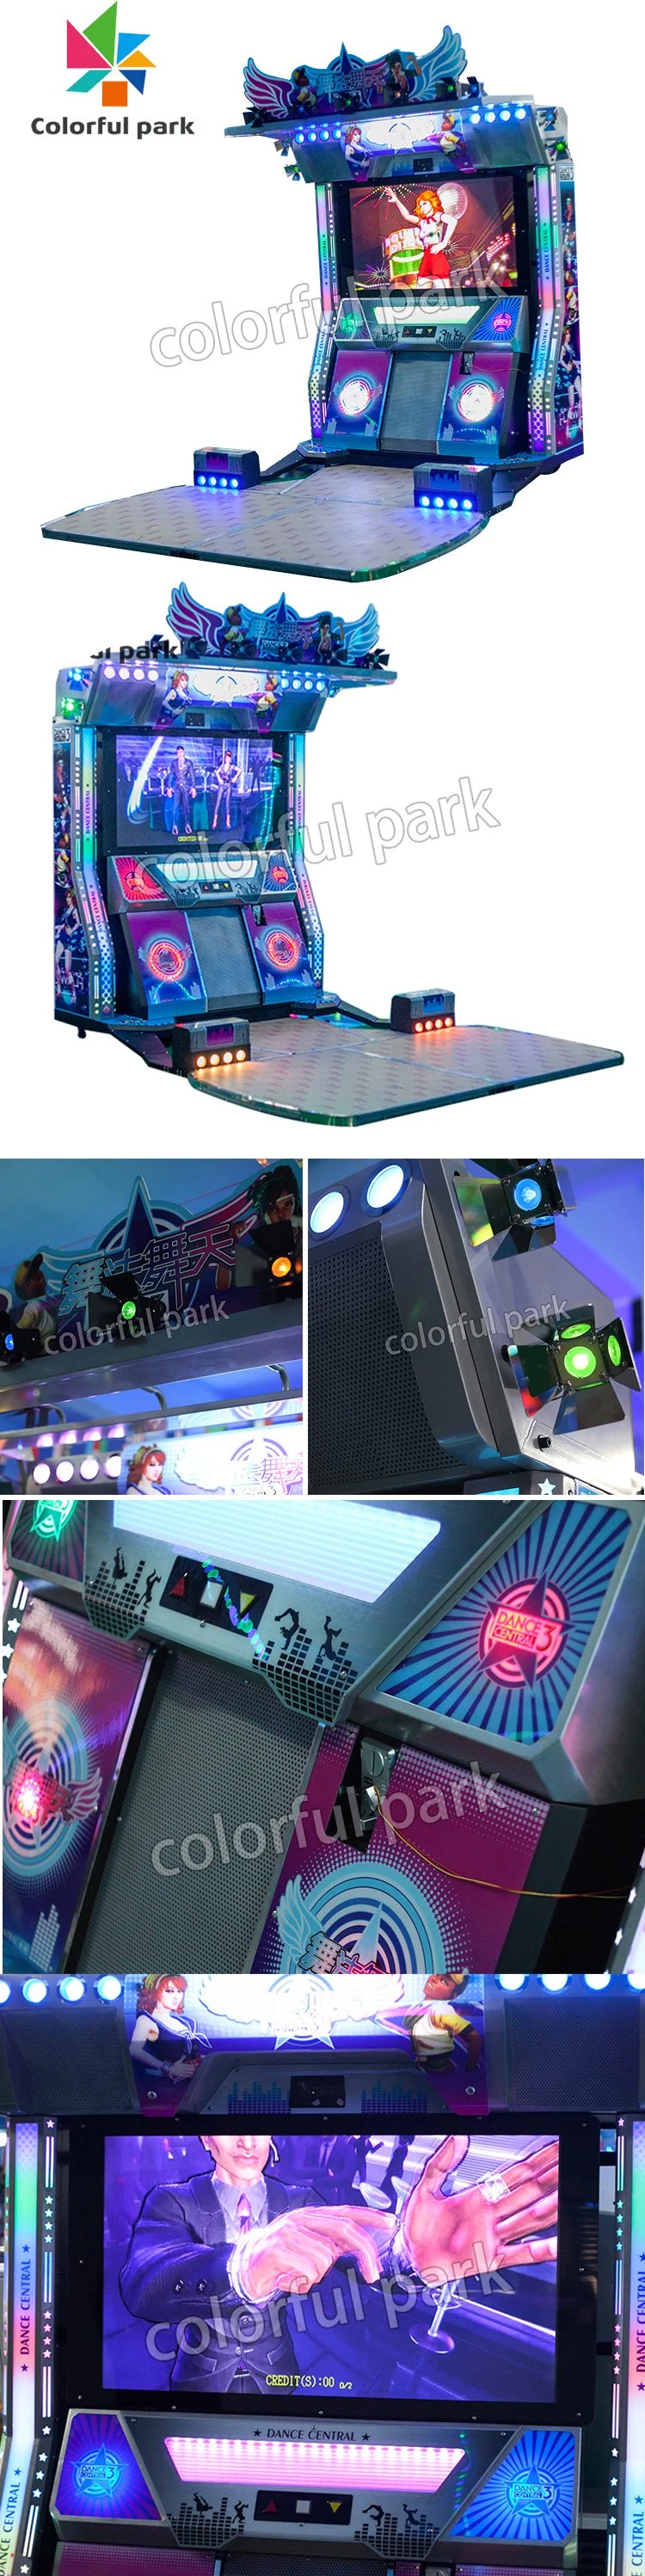 Colorful Park Dancing Machine Game Coin Operated Game Machine Game Coin Machine Dancing Game Machine